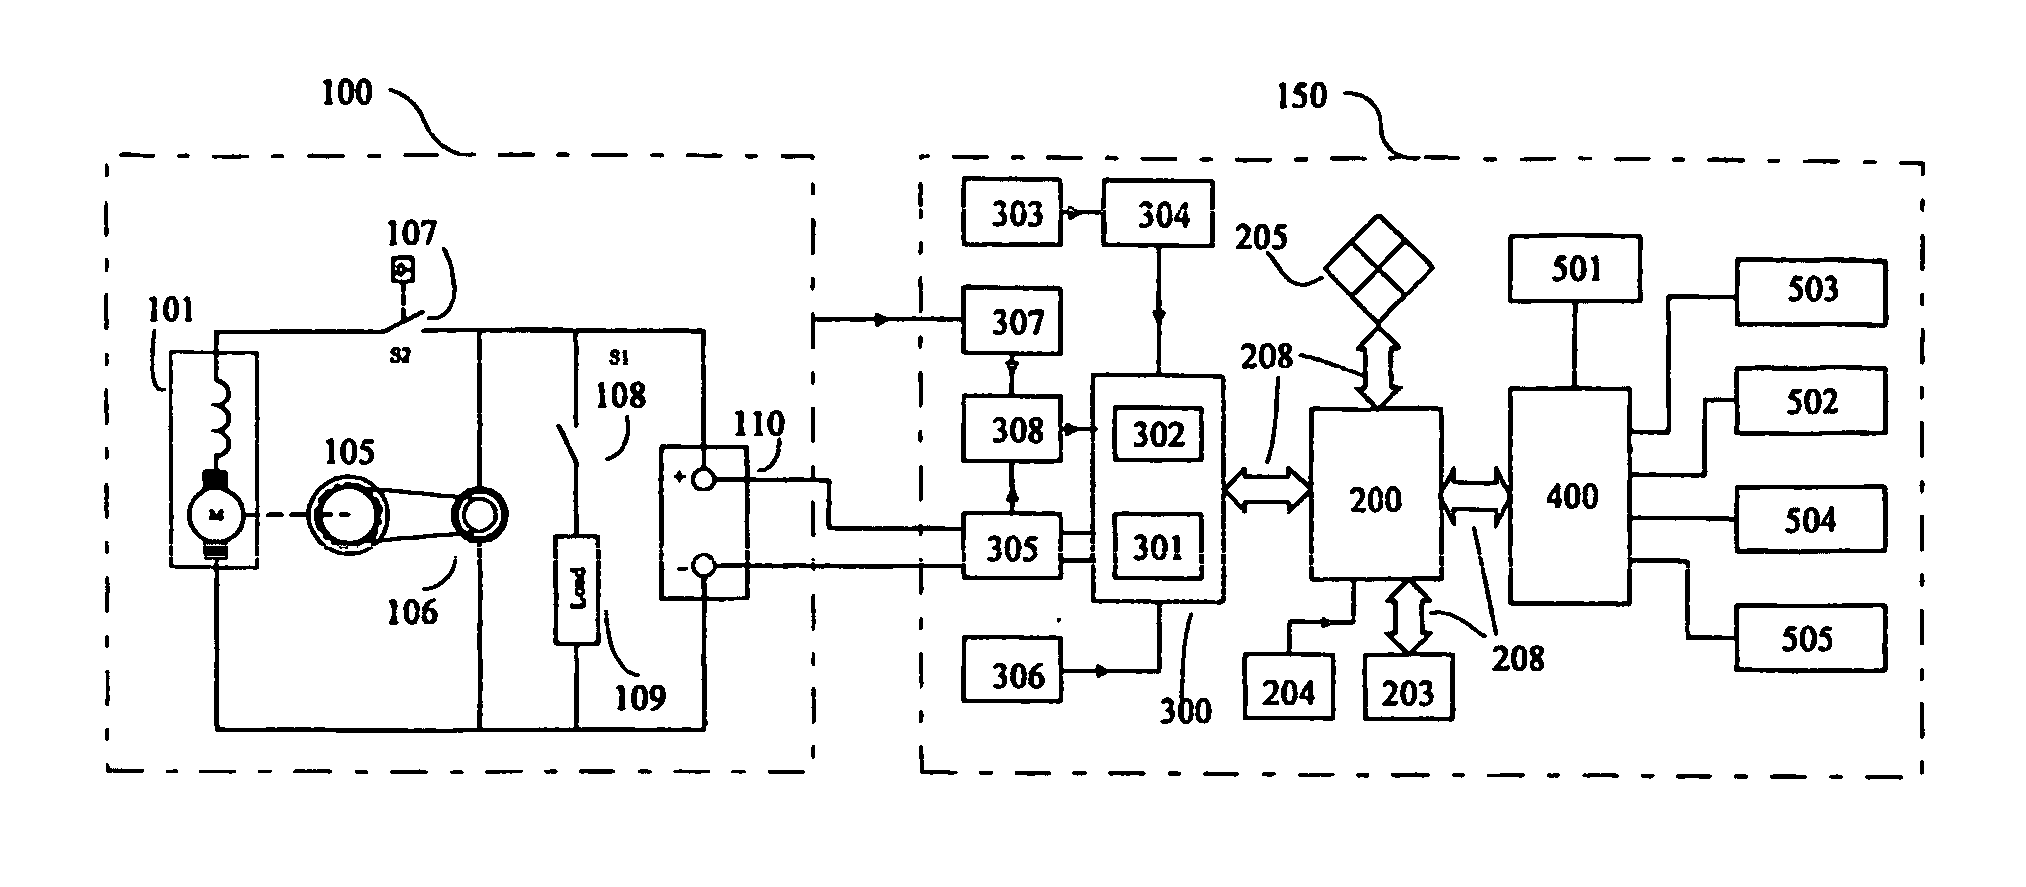 System and apparatus for vehicle electrical power analysis